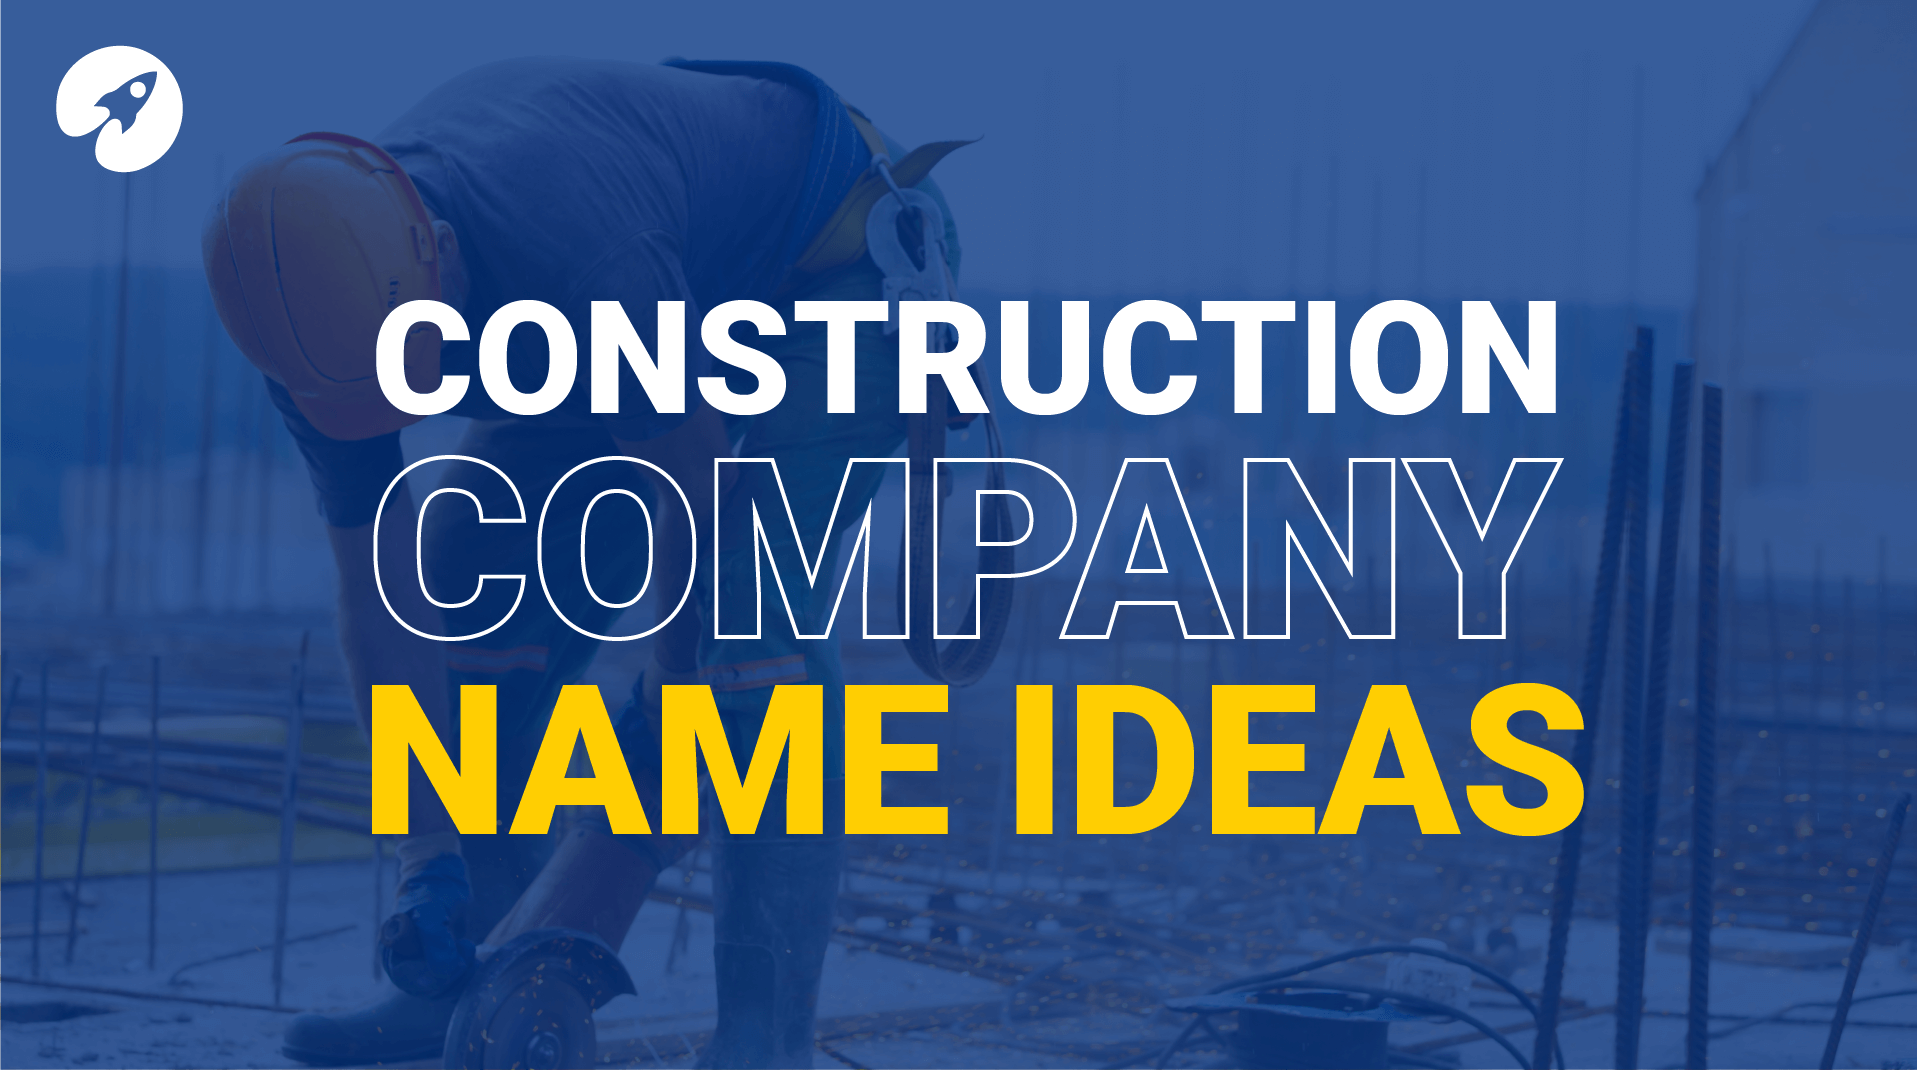 285 Construction company name ideas, how to name your business and be happy with it